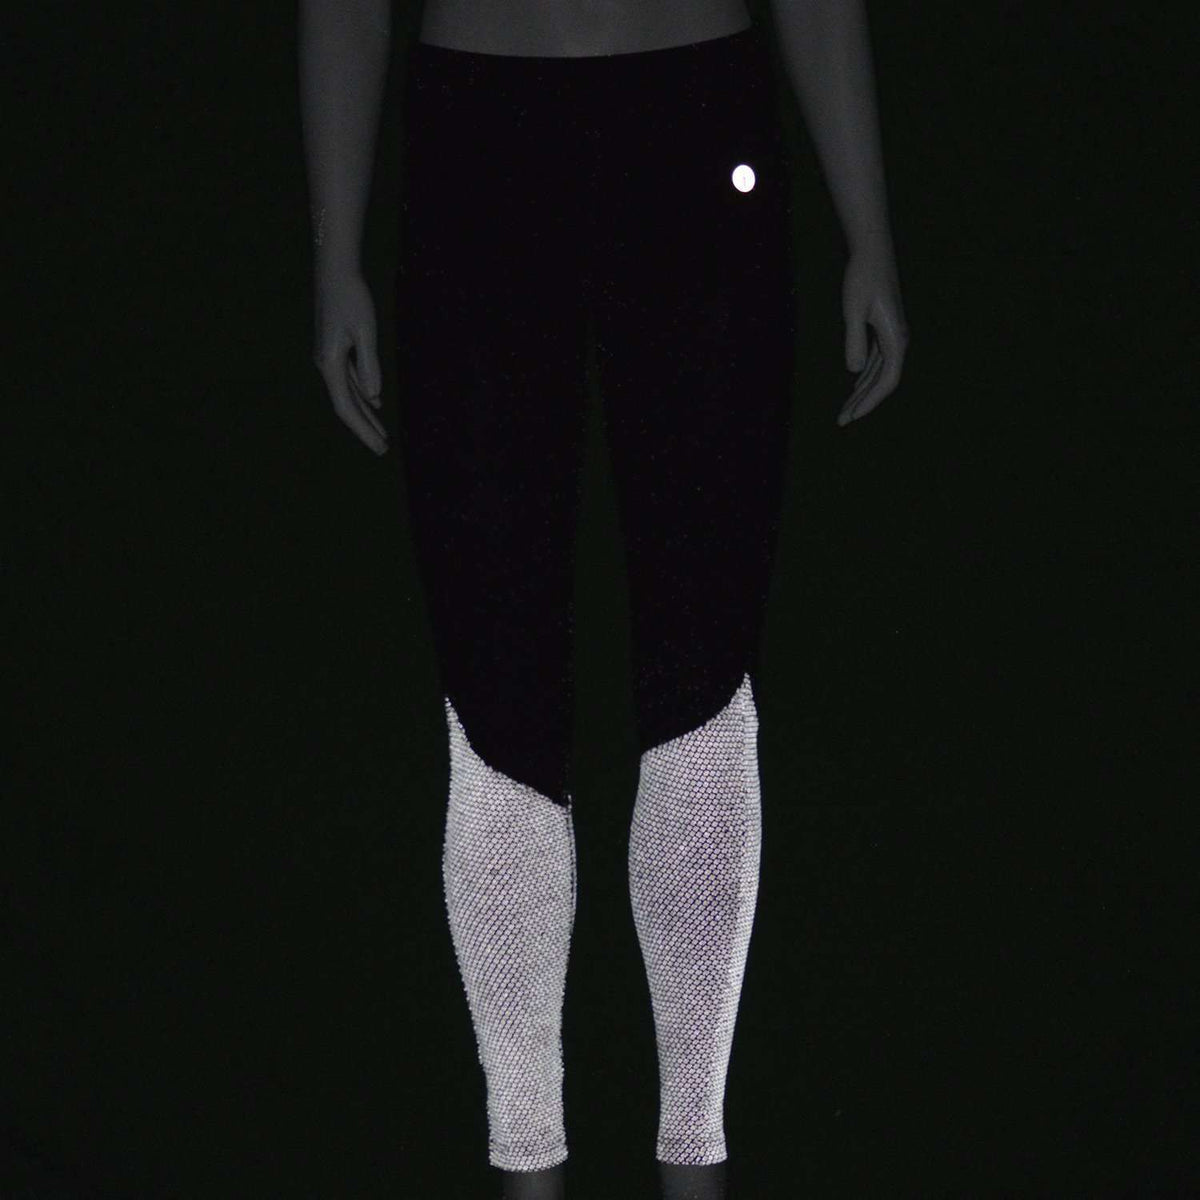 Women's Active Brushed Back Legging With Reflective Art 